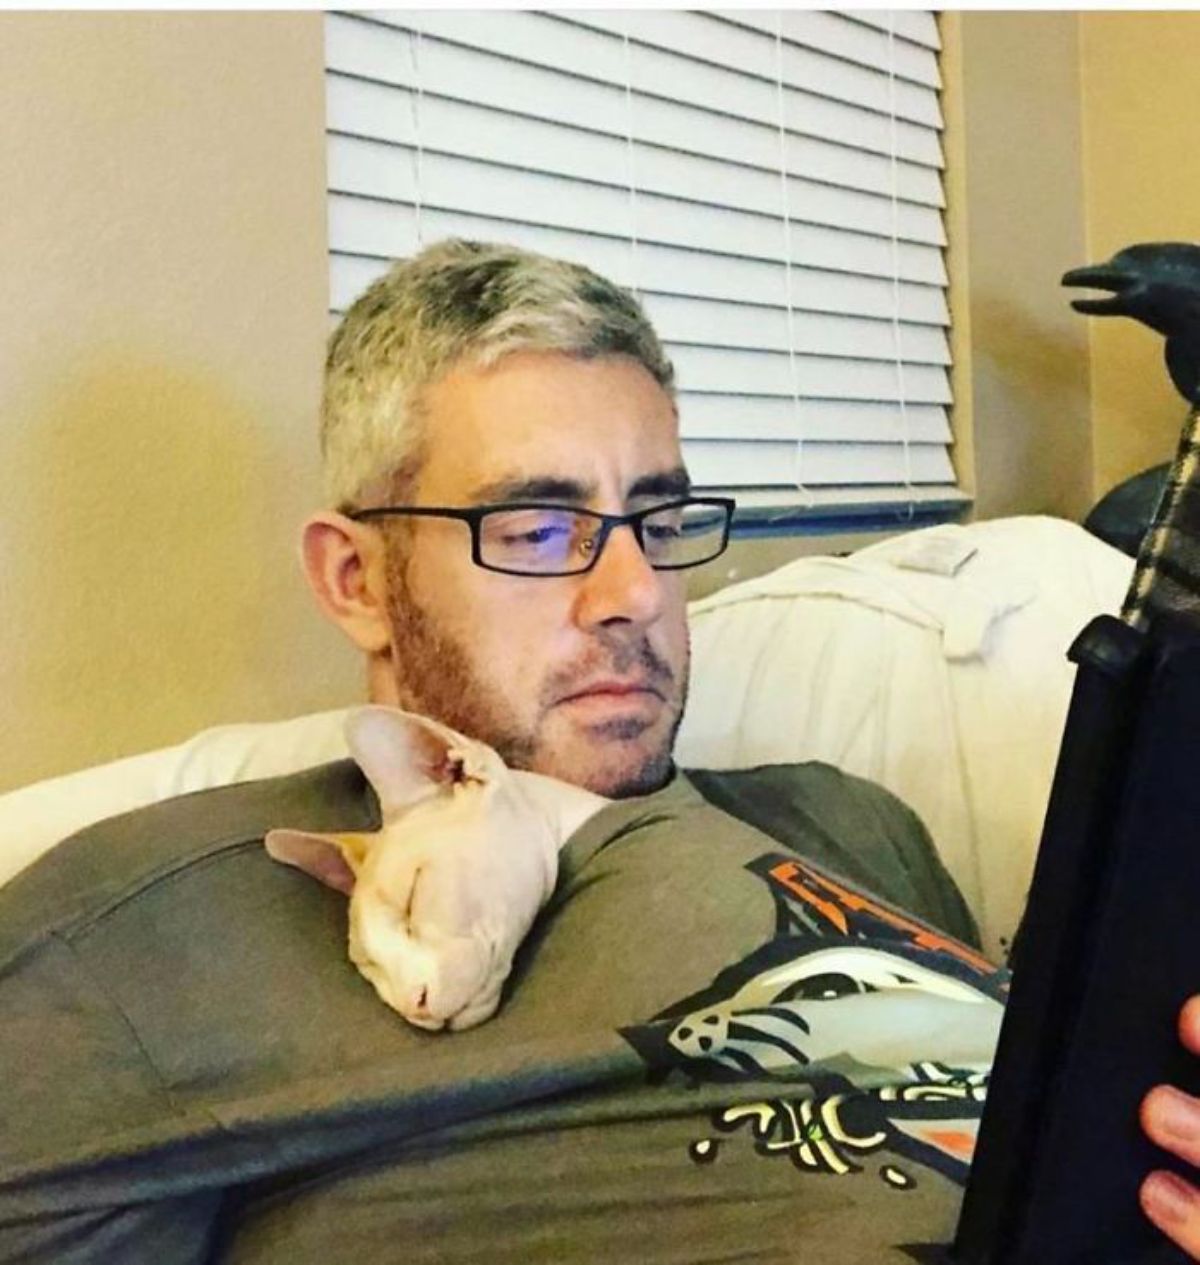 sphinx cat sleeping inside a man's shirt while he's on his phone